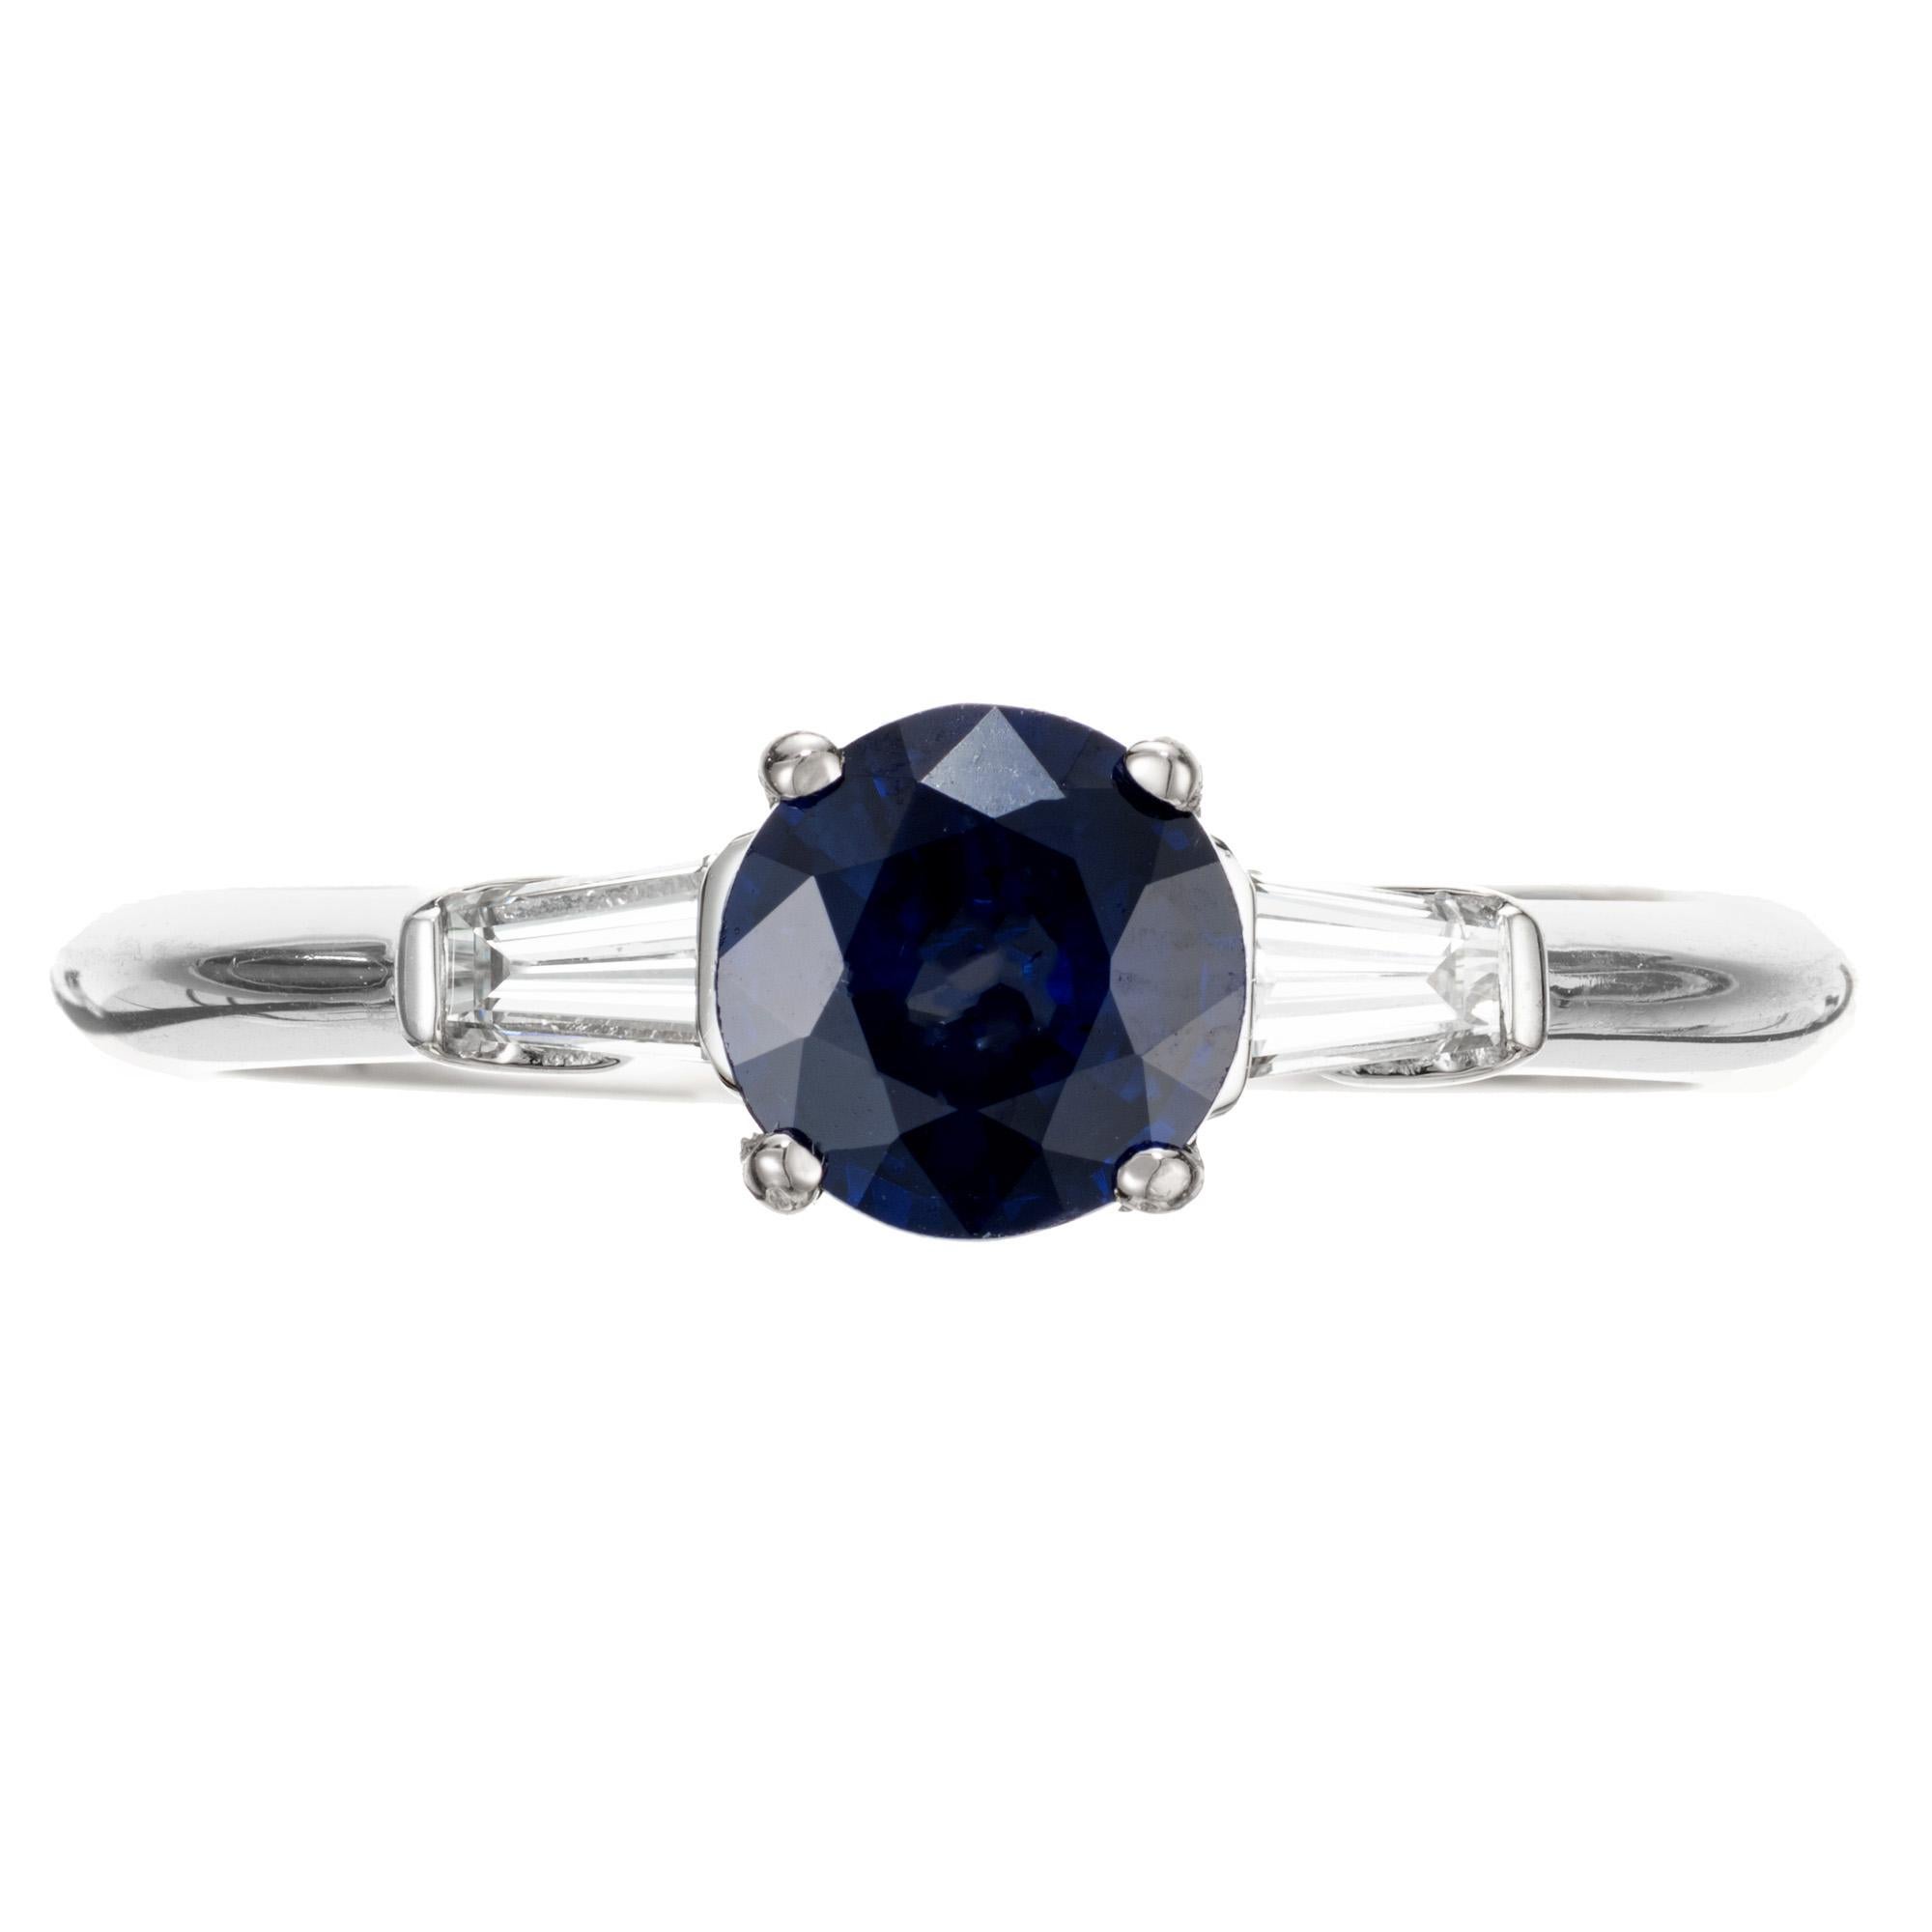 Round sapphire and diamond engagement ring. GIA certified oval shaped center sapphire in a three-stone 18k white gold setting with 2 tapered baguettes and 2 round accent diamonds. The sapphire is simple heat only. Created in the Peter Suchy